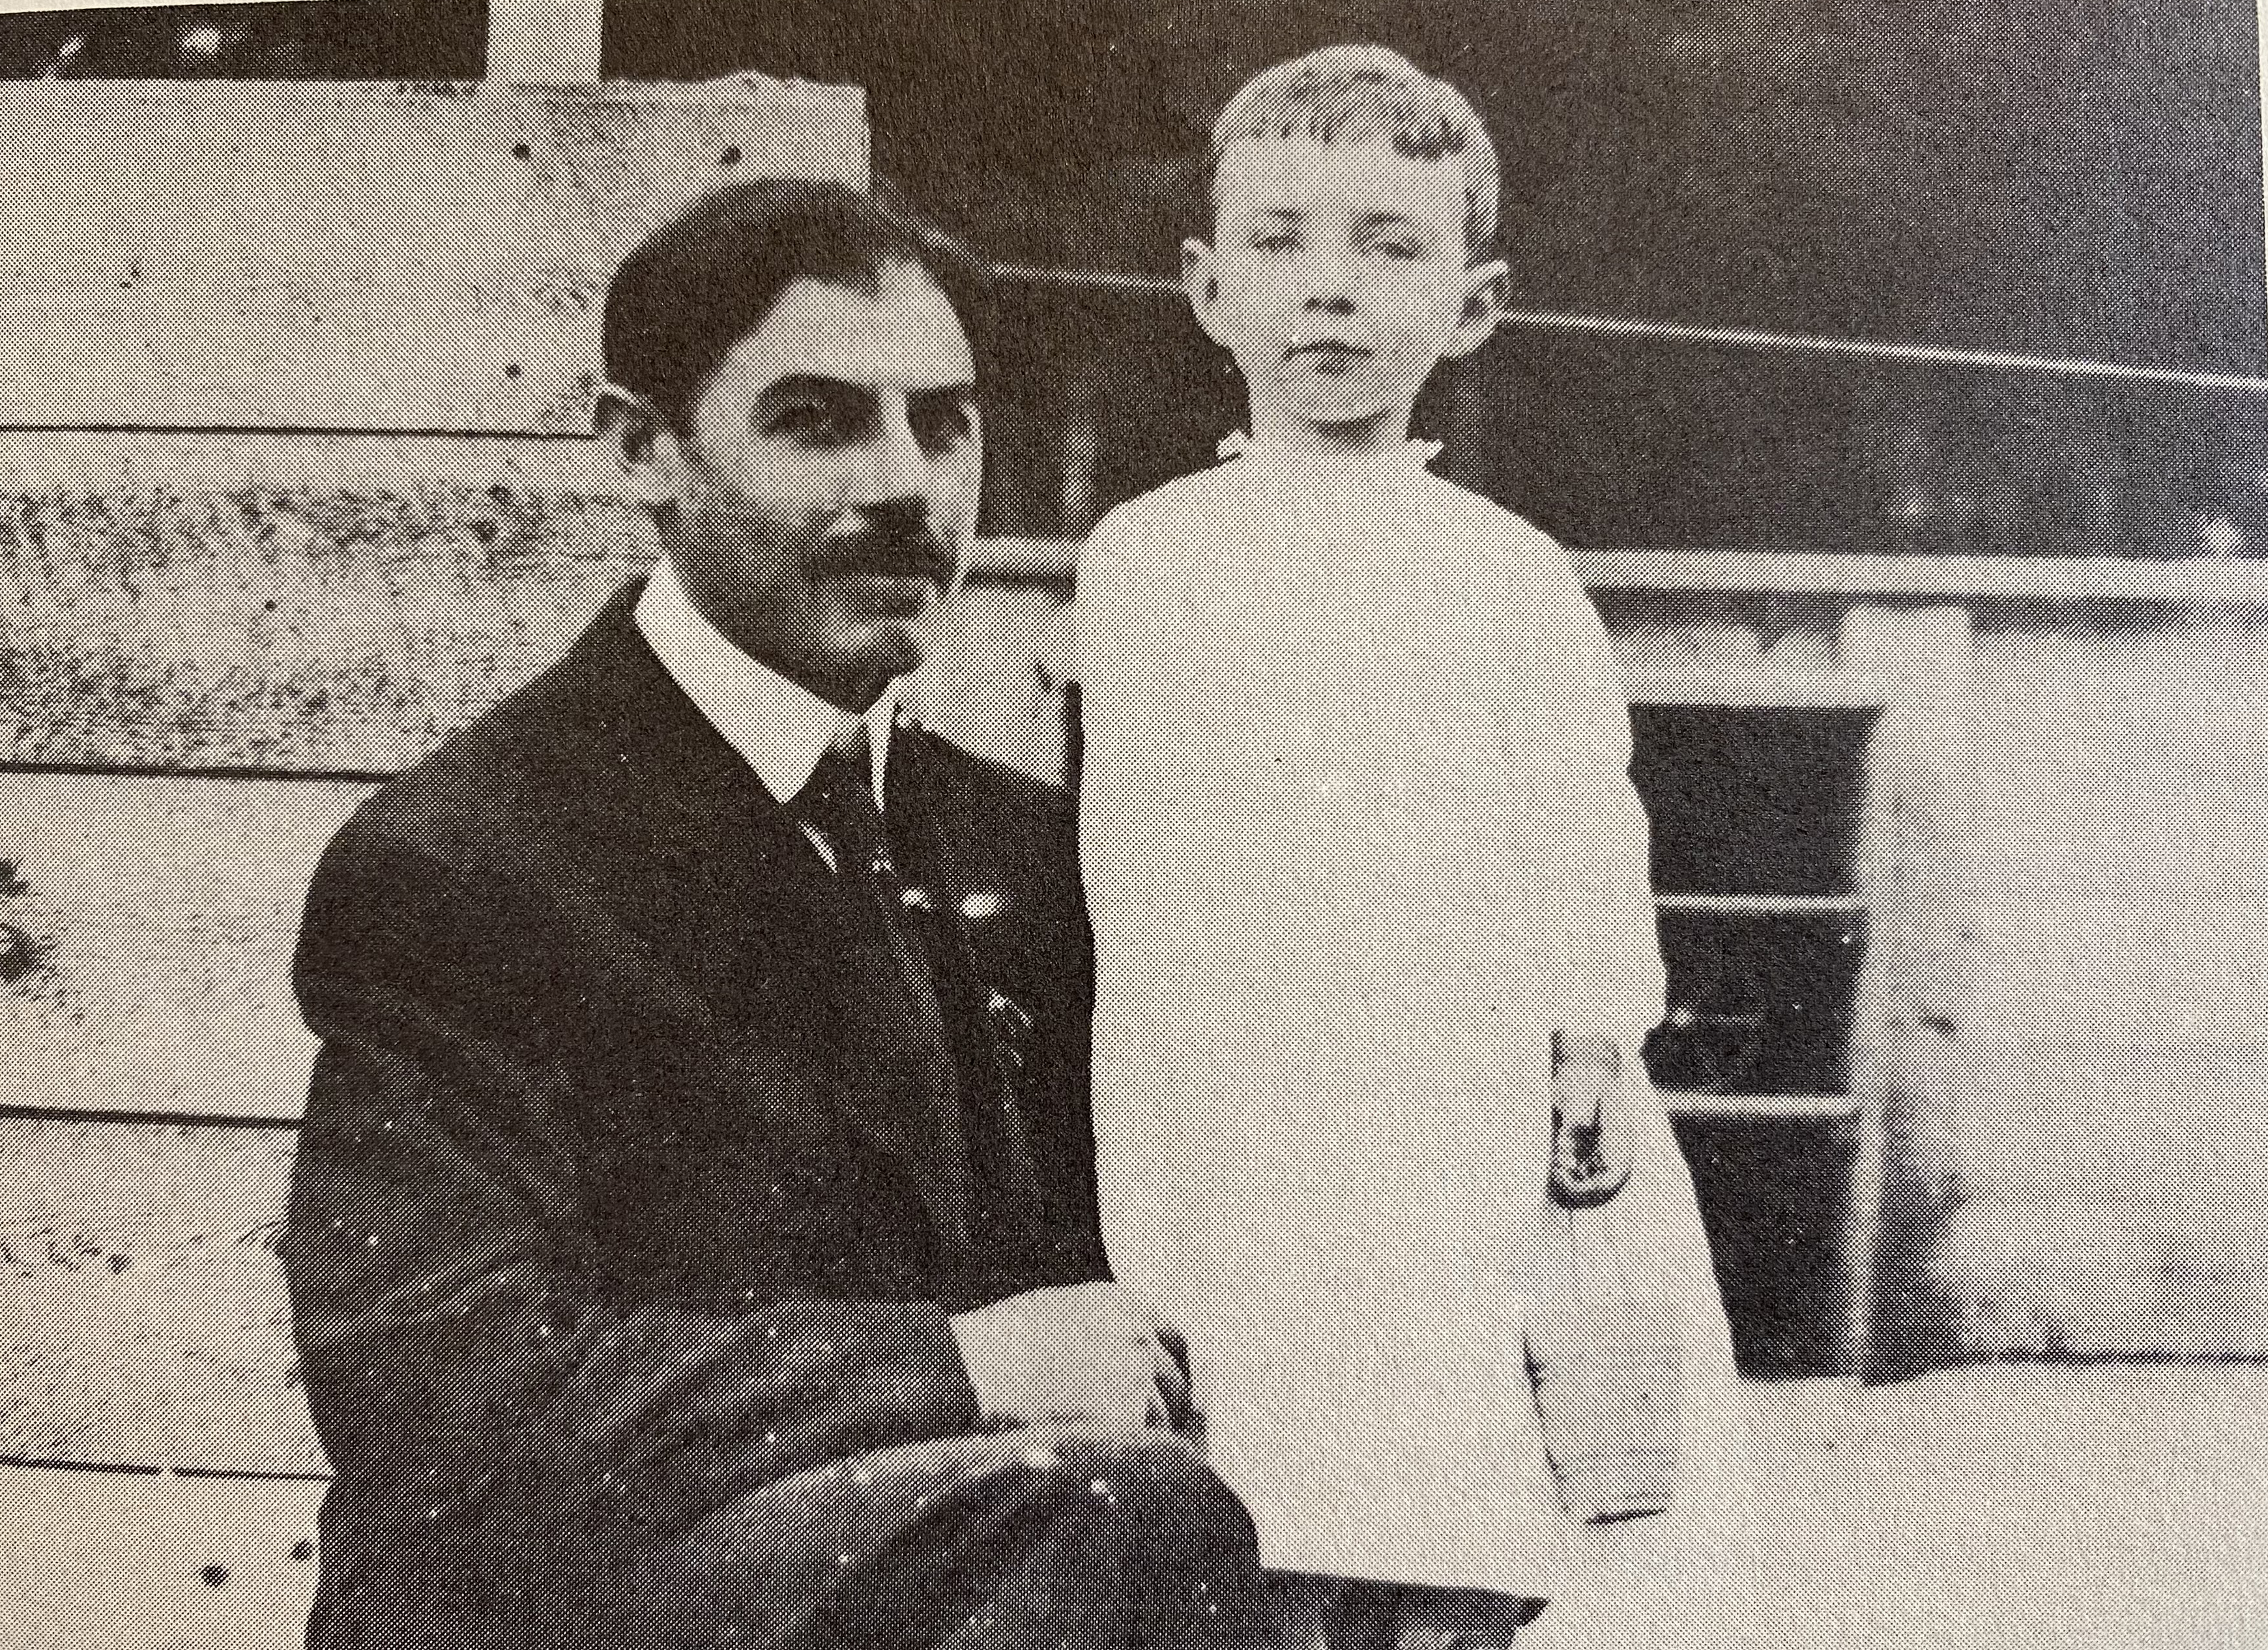 Black and white photo of a young Oppenheimer standing next to his seated father Julius.